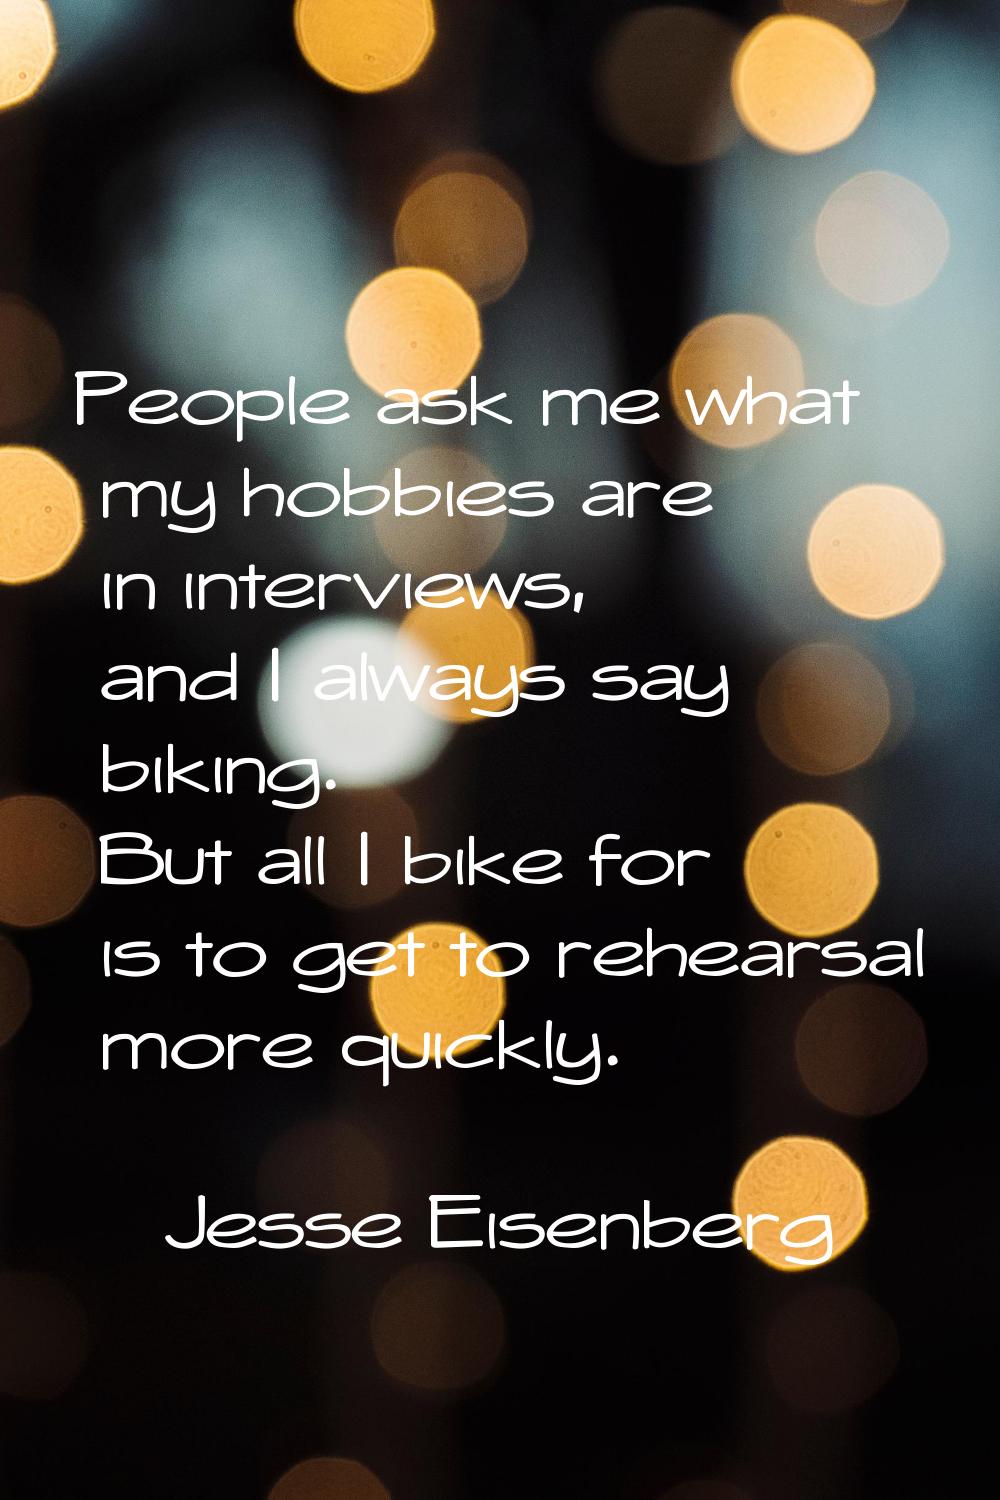 People ask me what my hobbies are in interviews, and I always say biking. But all I bike for is to 